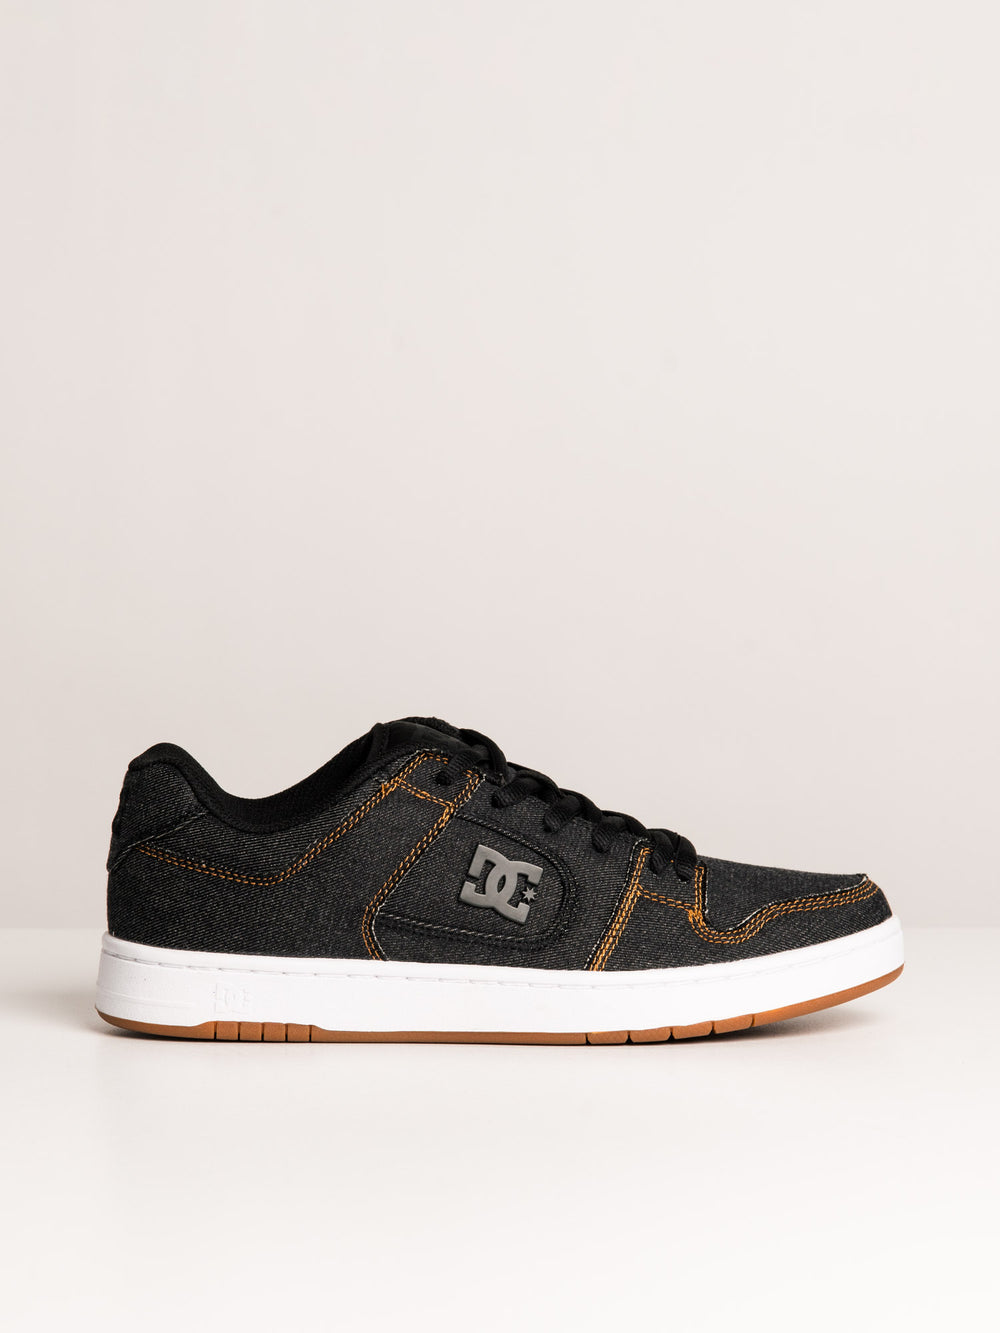 MENS DC SHOES MANTECA 4 SNEAKER - CLEARANCE